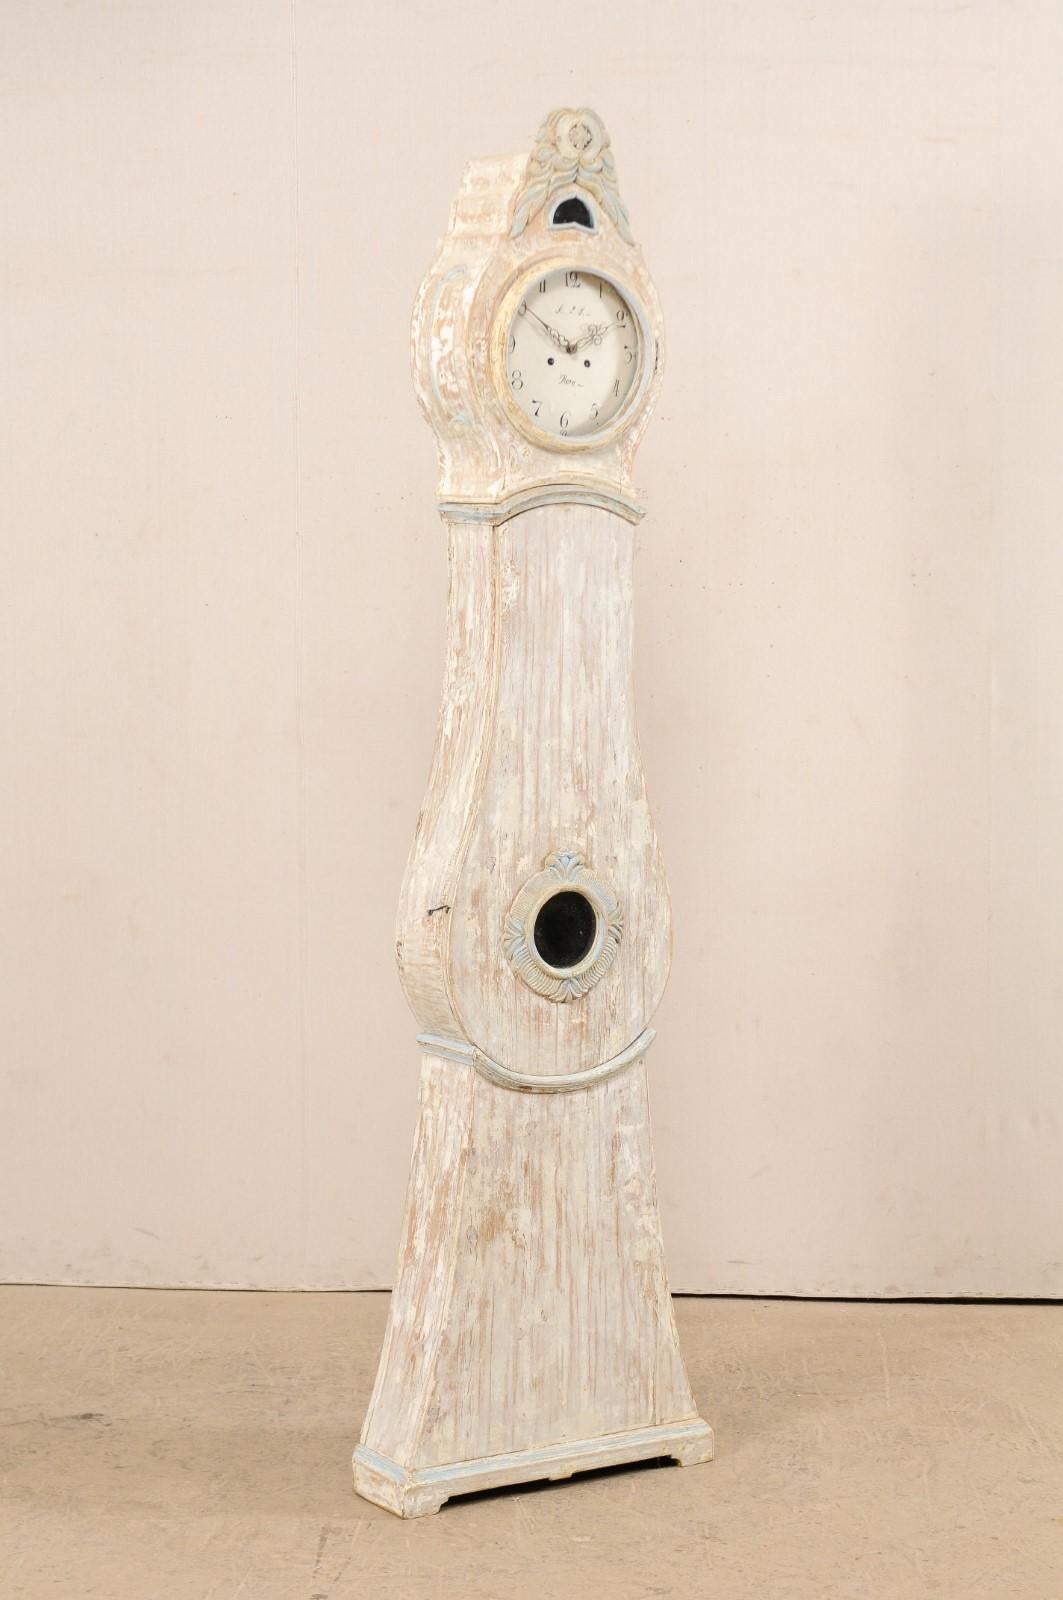 19th Century Northern Swedish Floor Clock, circa 1820s with Nicely Carved Crest